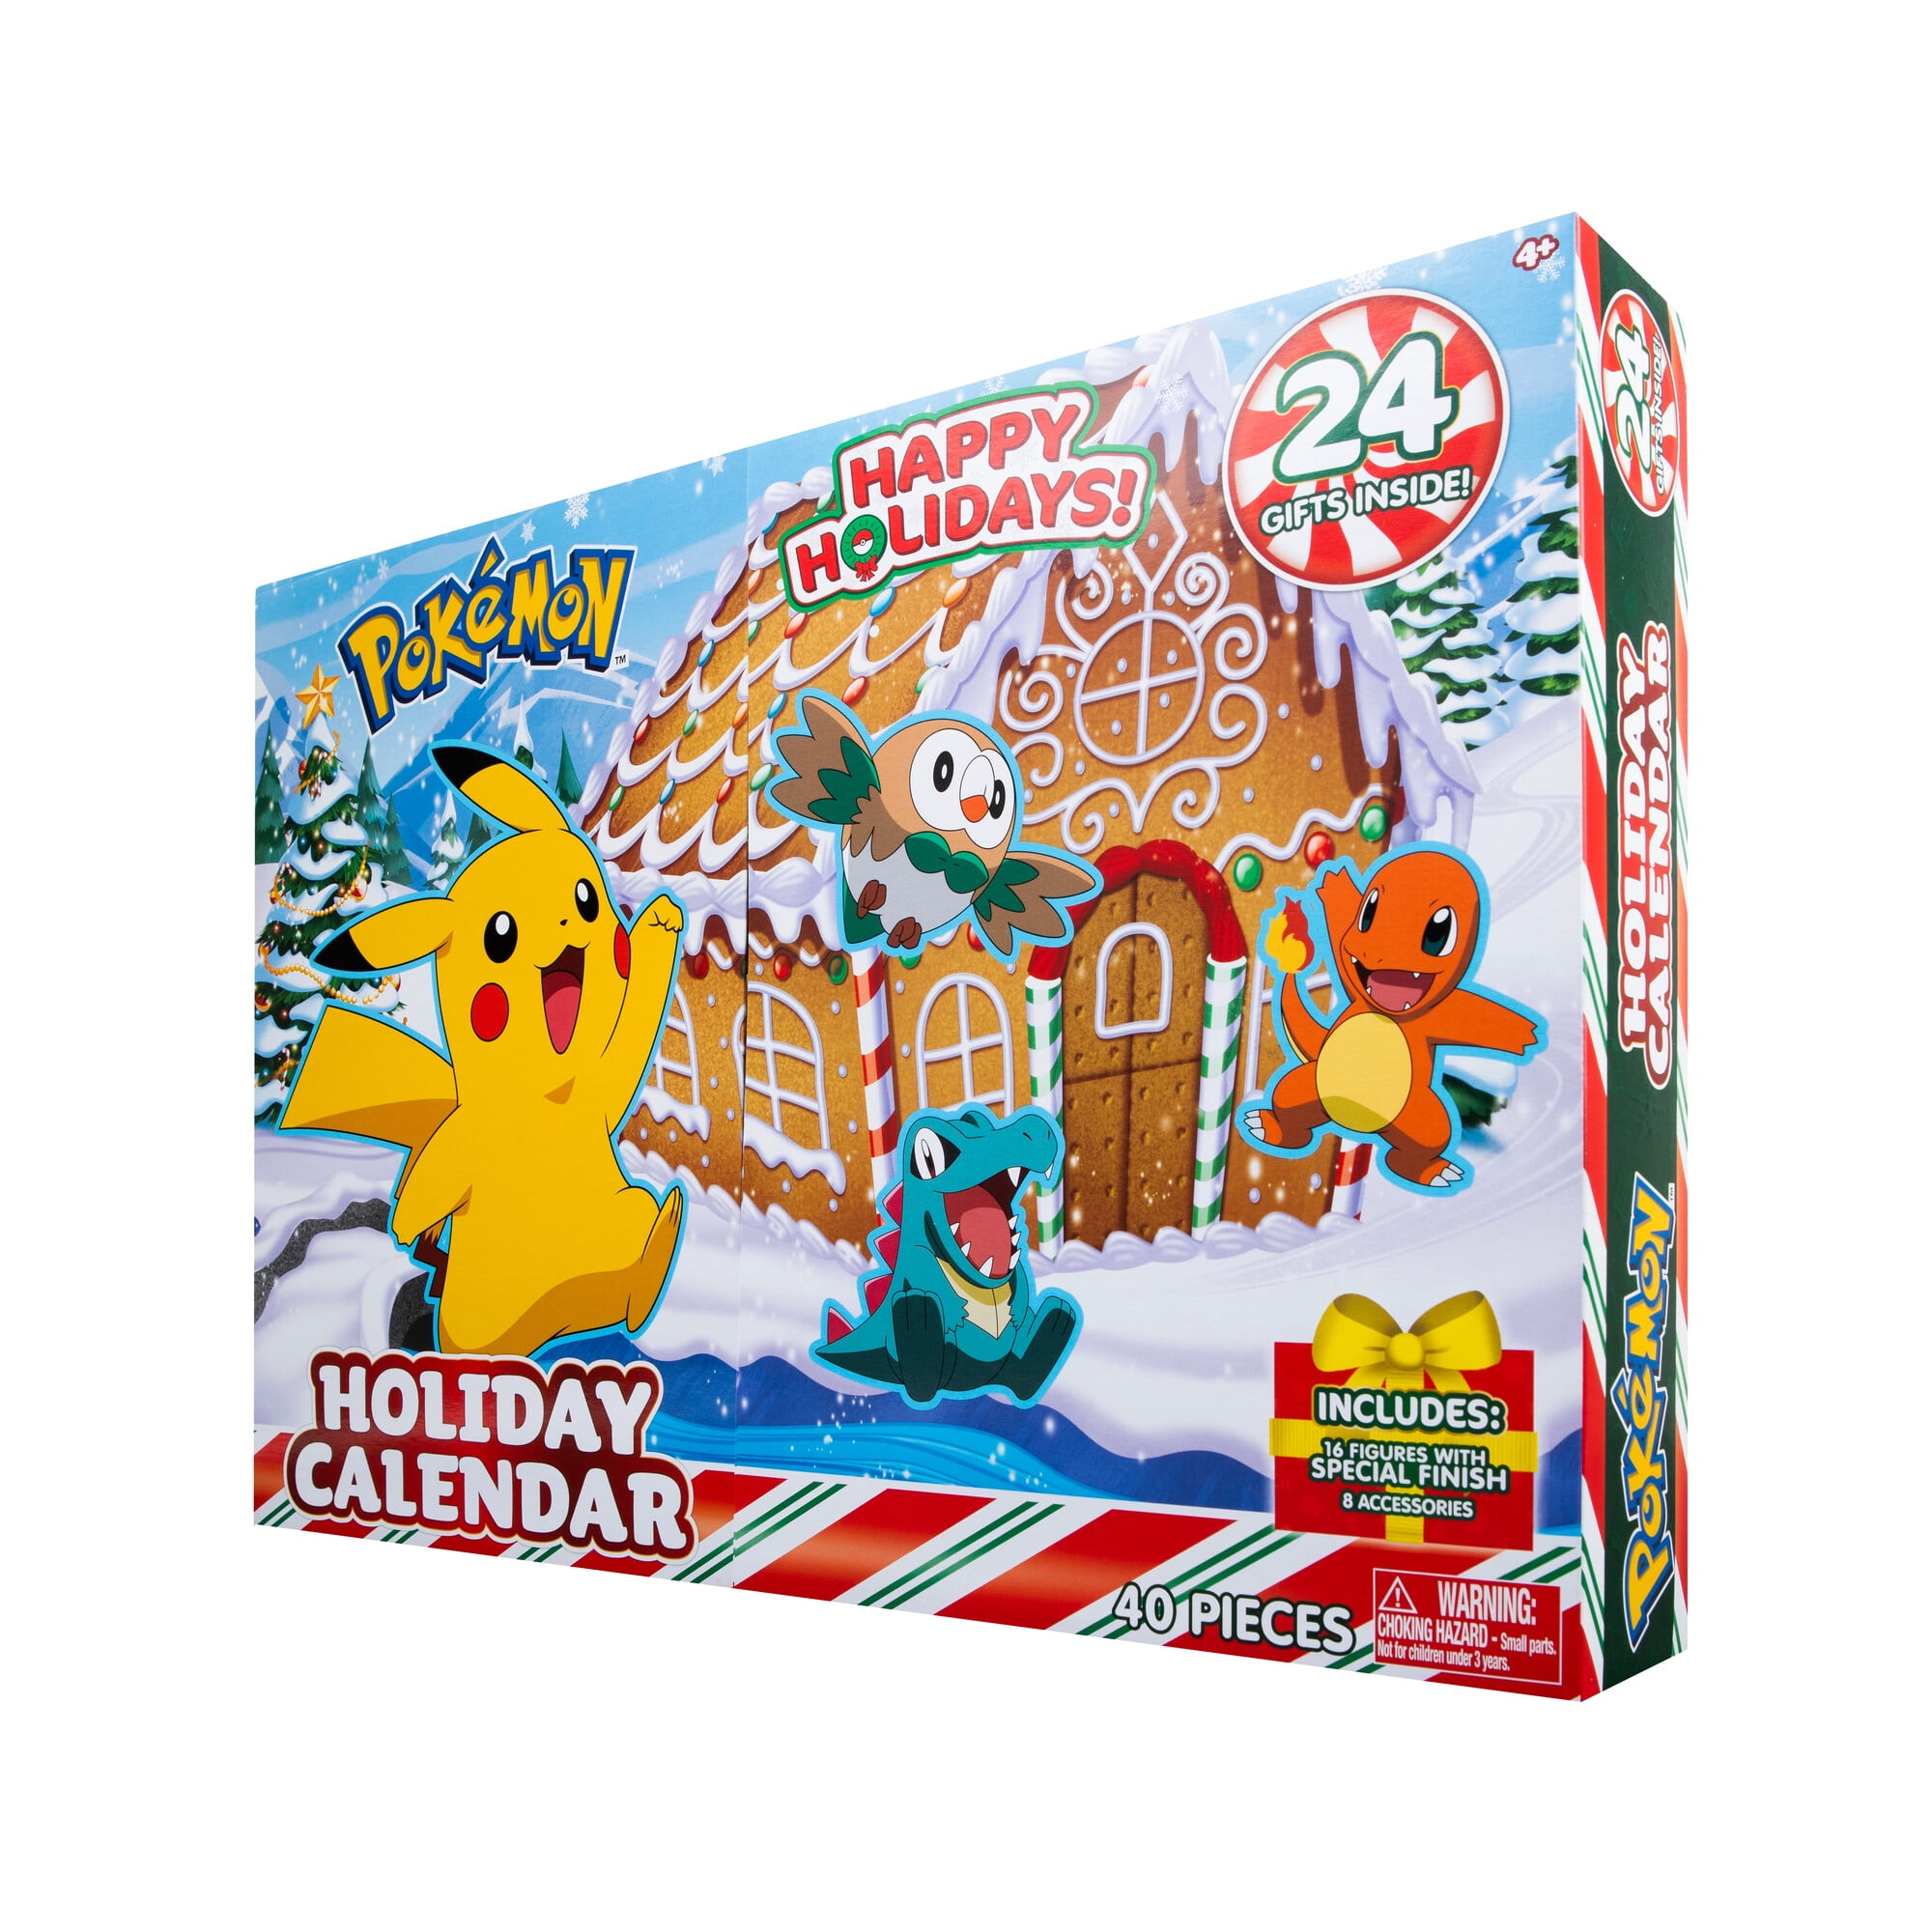 Pokemon™ Action Figure in Holiday Calendar, 1 ct - Fred Meyer